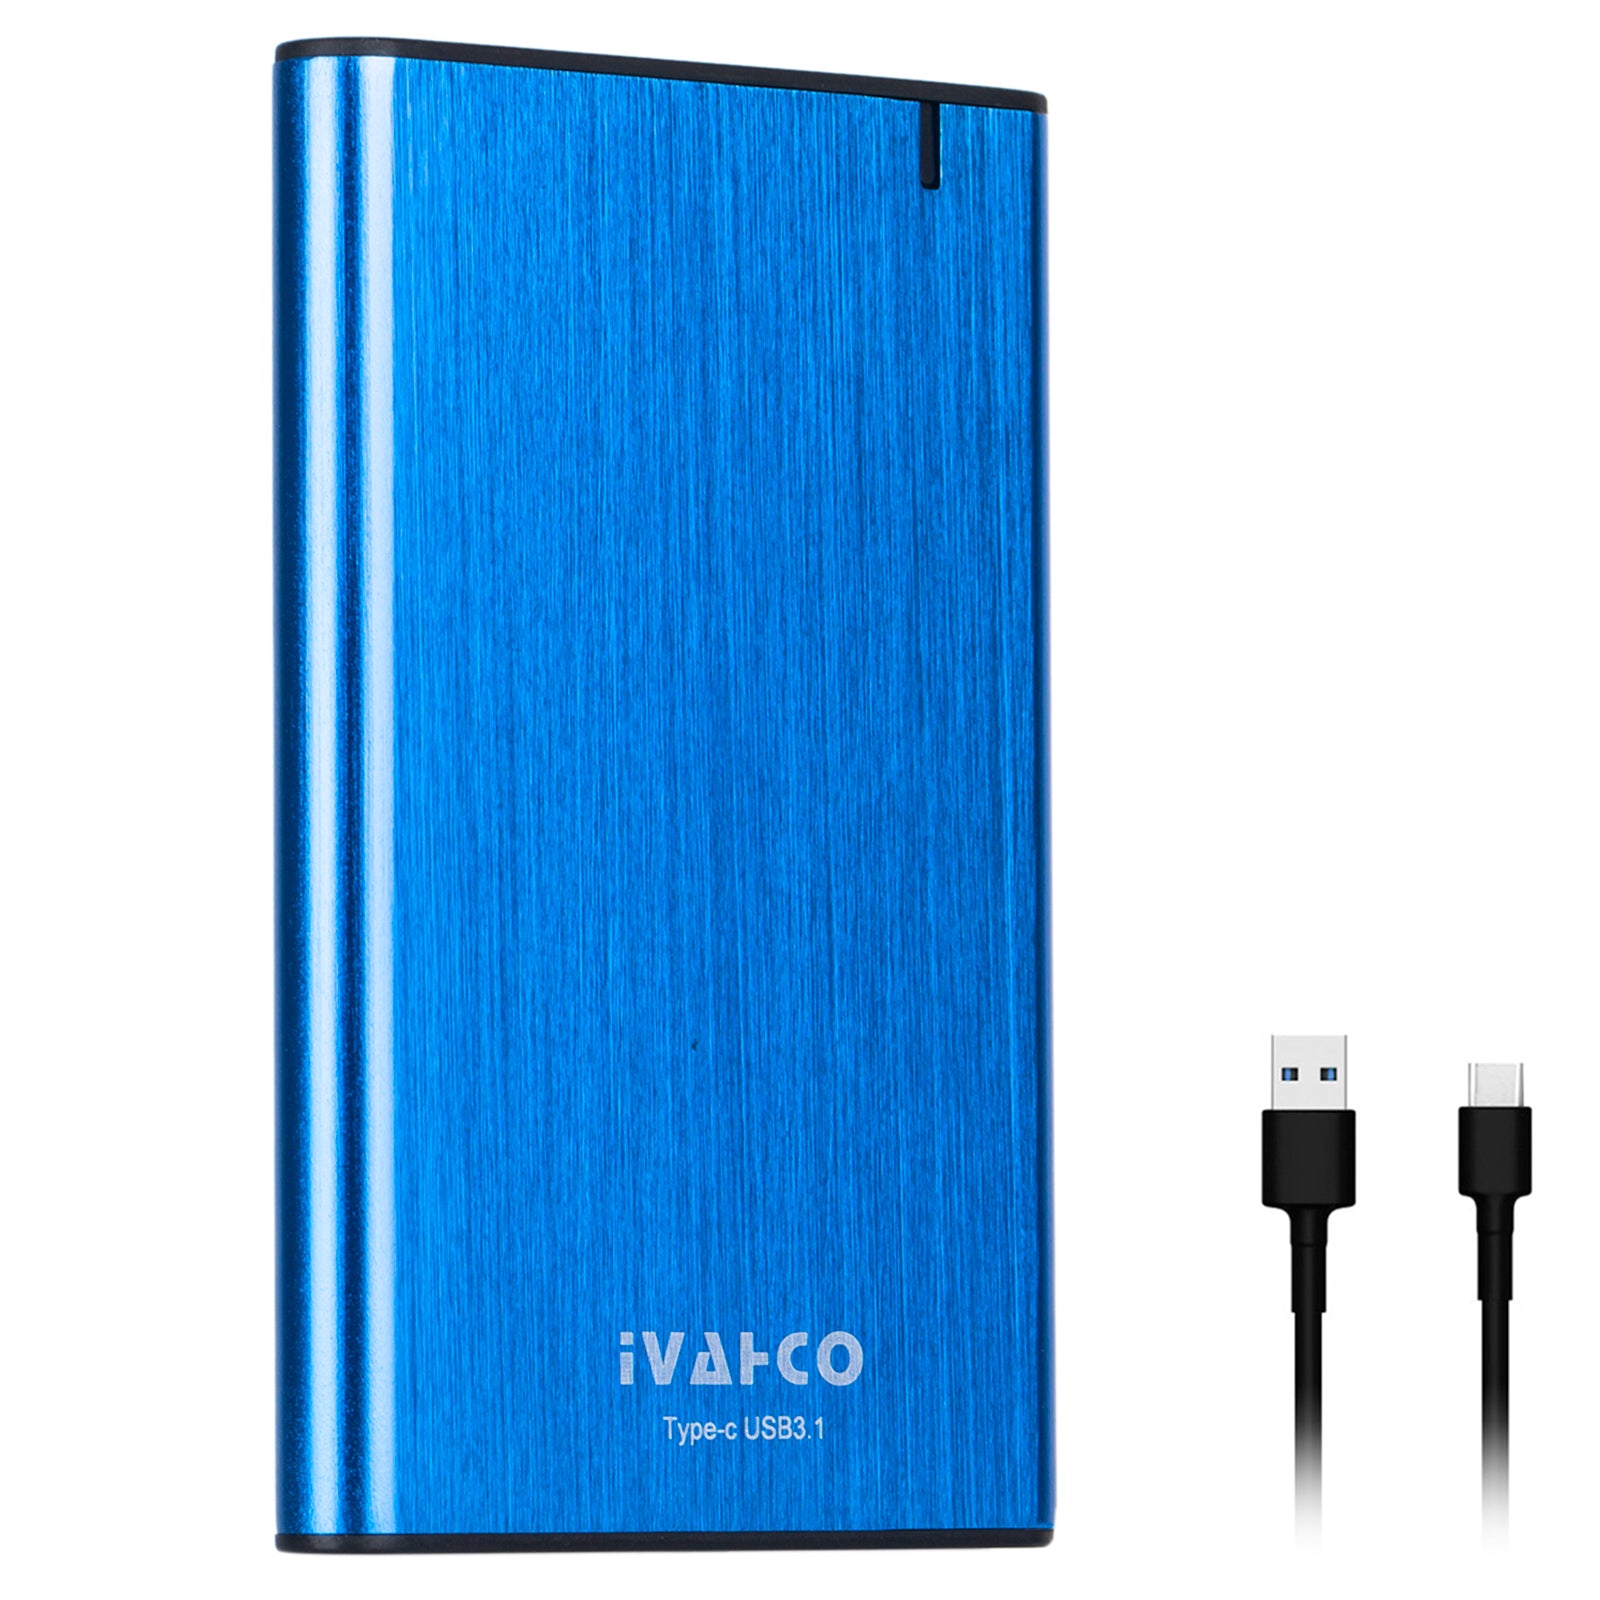 IVAHCO 750GB HDD External Case Type-C USB3.1 2.5" Brushed Metal Solid State Drive Enclosure with Indicator - Blue